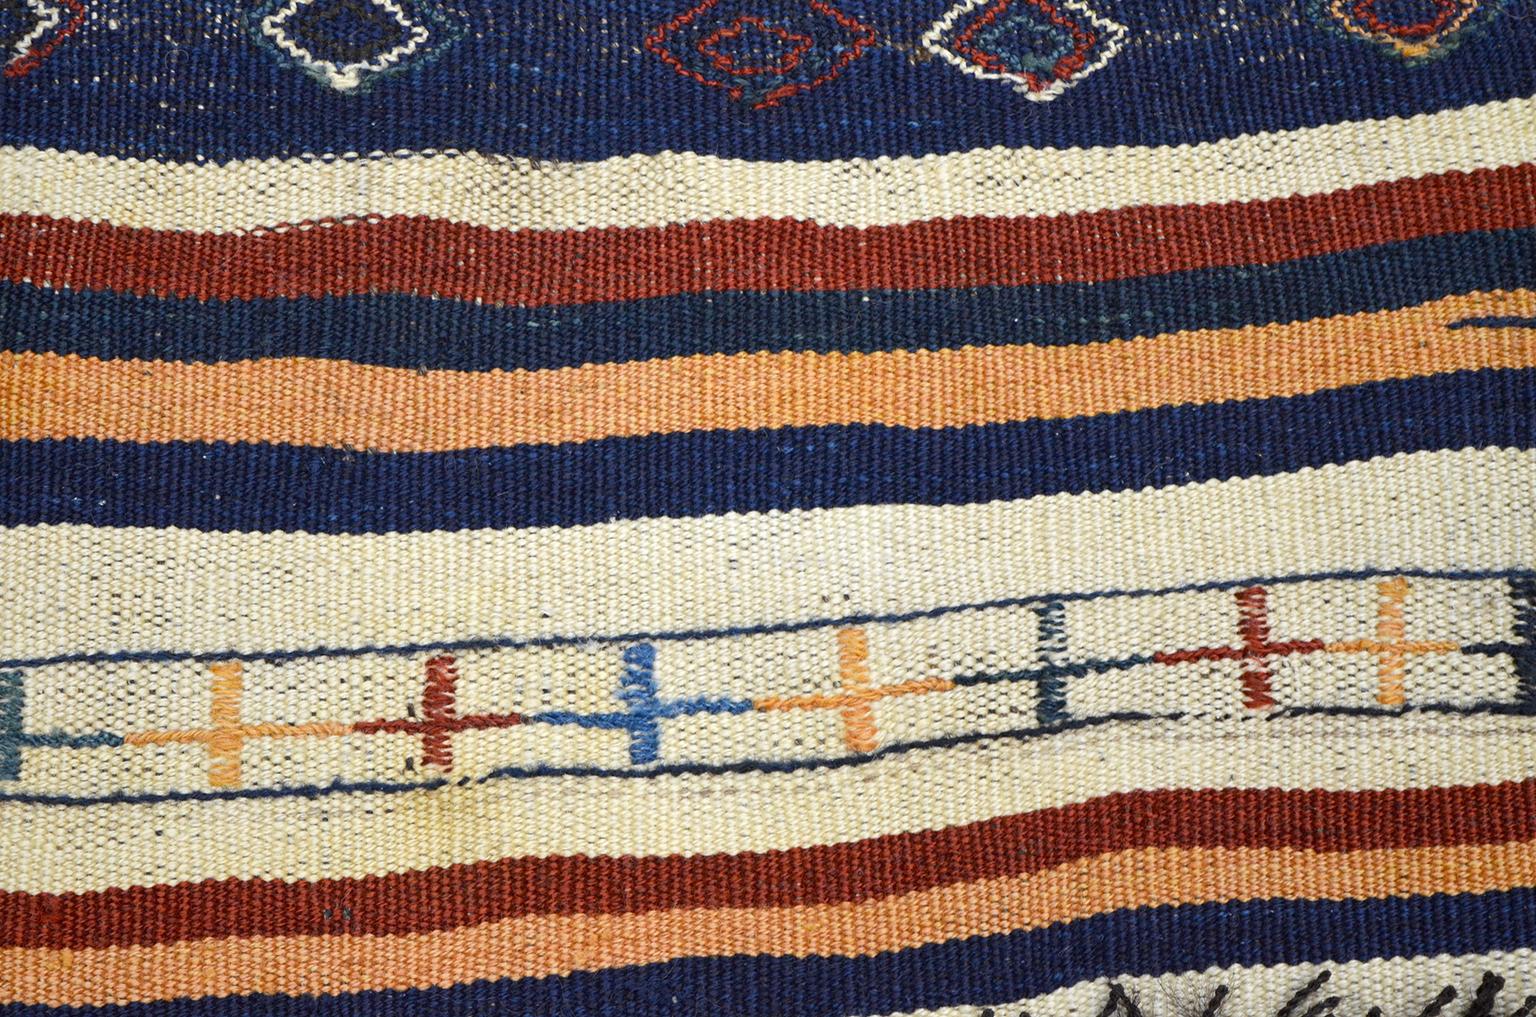 This kilim and soumak Persian saddle blanket in pure wool, circa 1910 exhibits a unique combination of vegetable dyed primary colors amid undyed wools. It is in good antique condition, and the size is 3'4